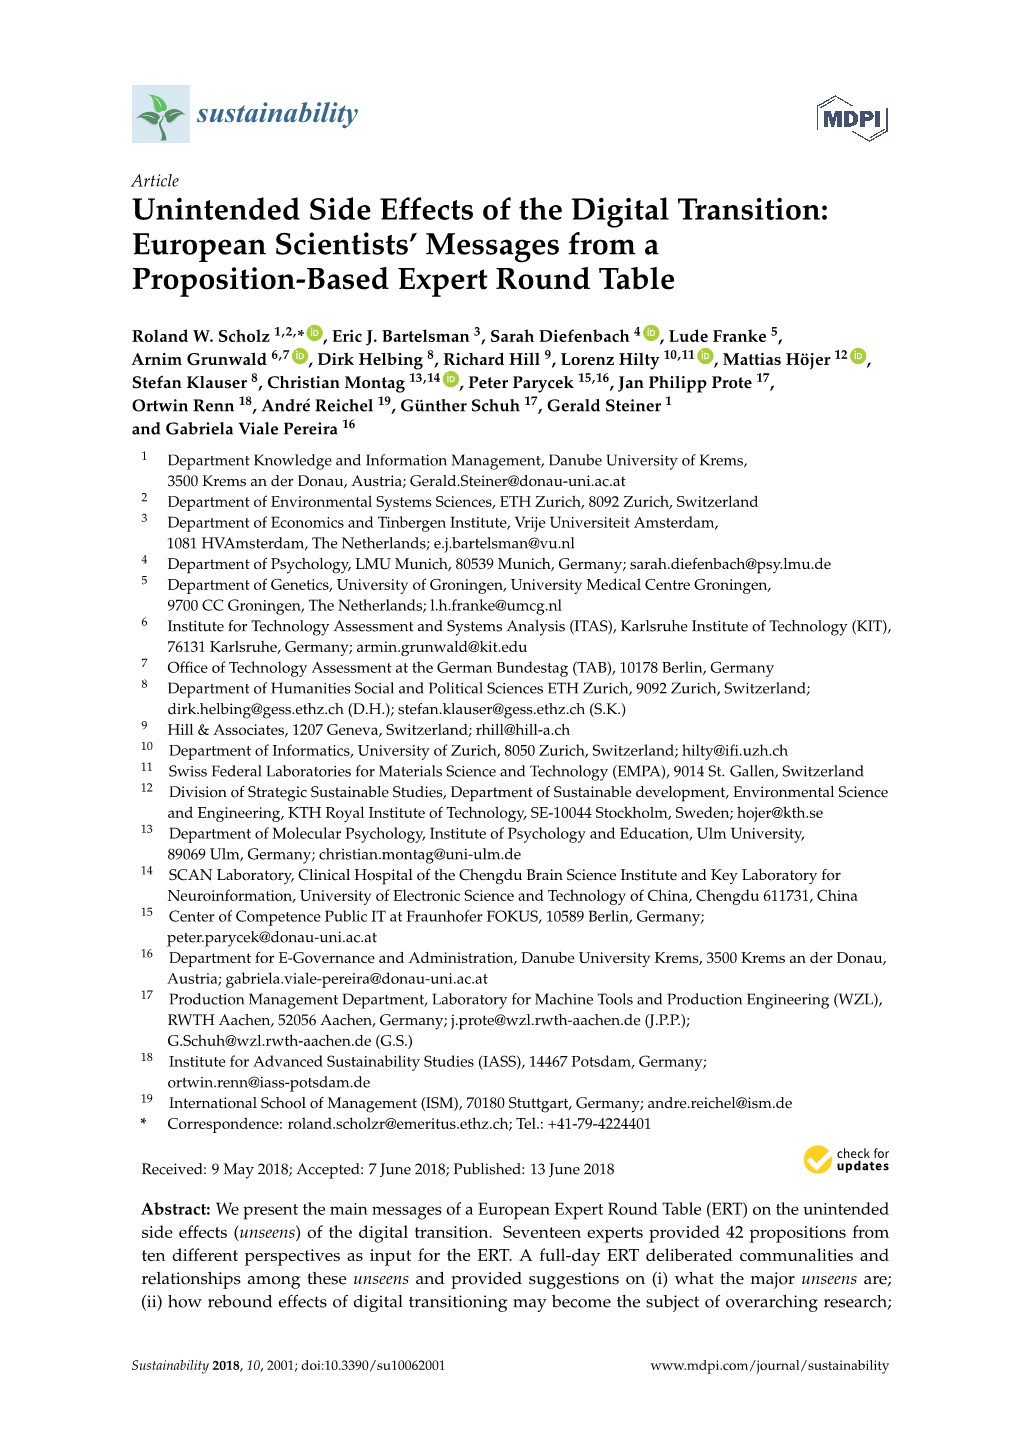 Unintended Side Effects of the Digital Transition: European Scientists’ Messages from a Proposition-Based Expert Round Table